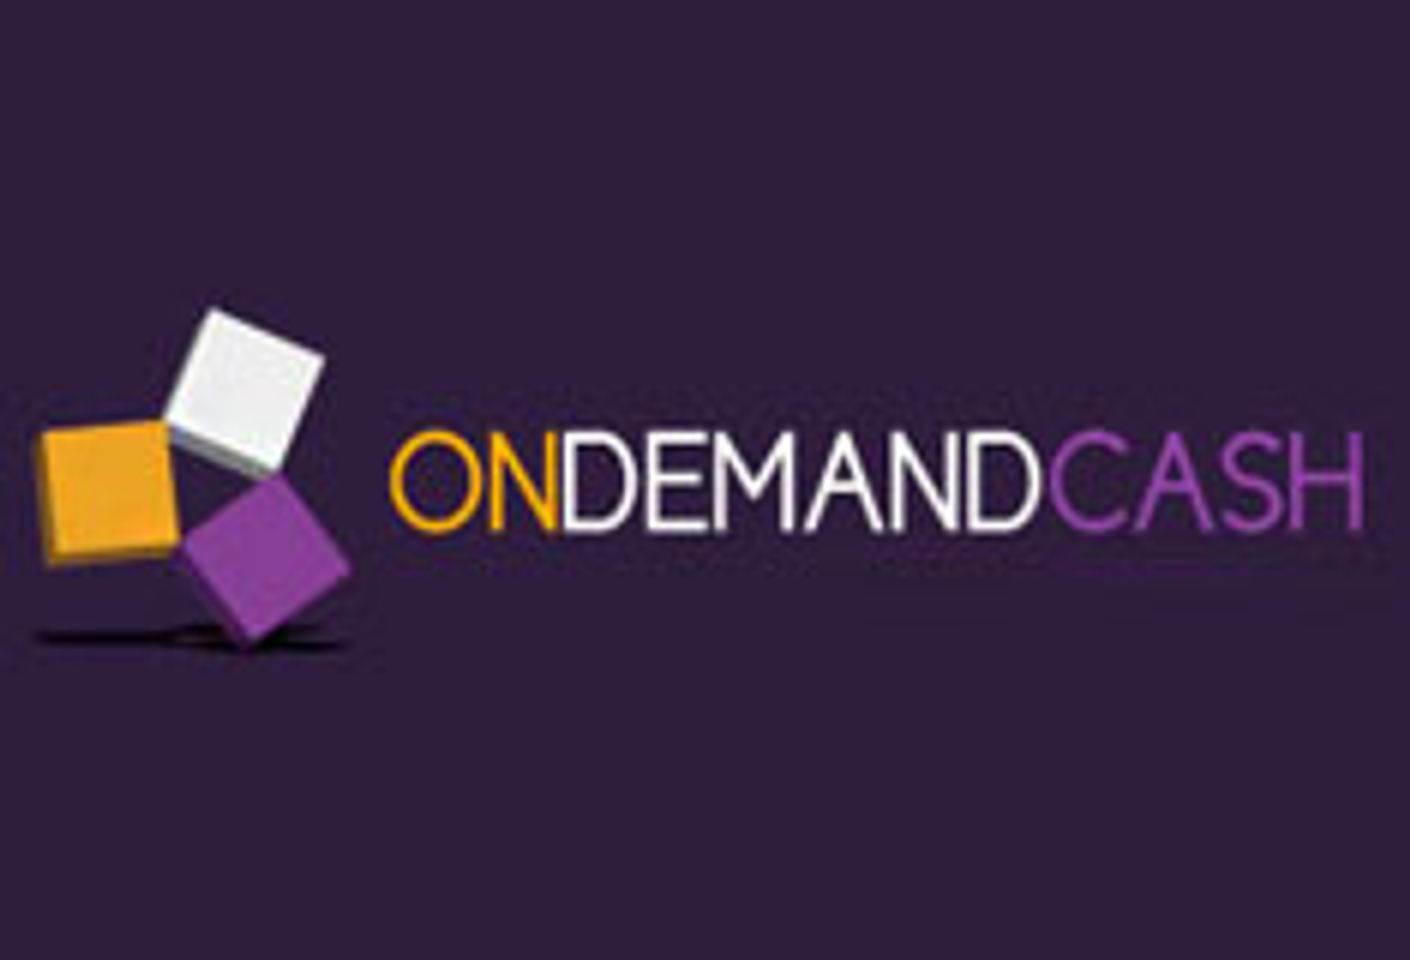 OnDemandCash to Introduce Flagship Website at Internext